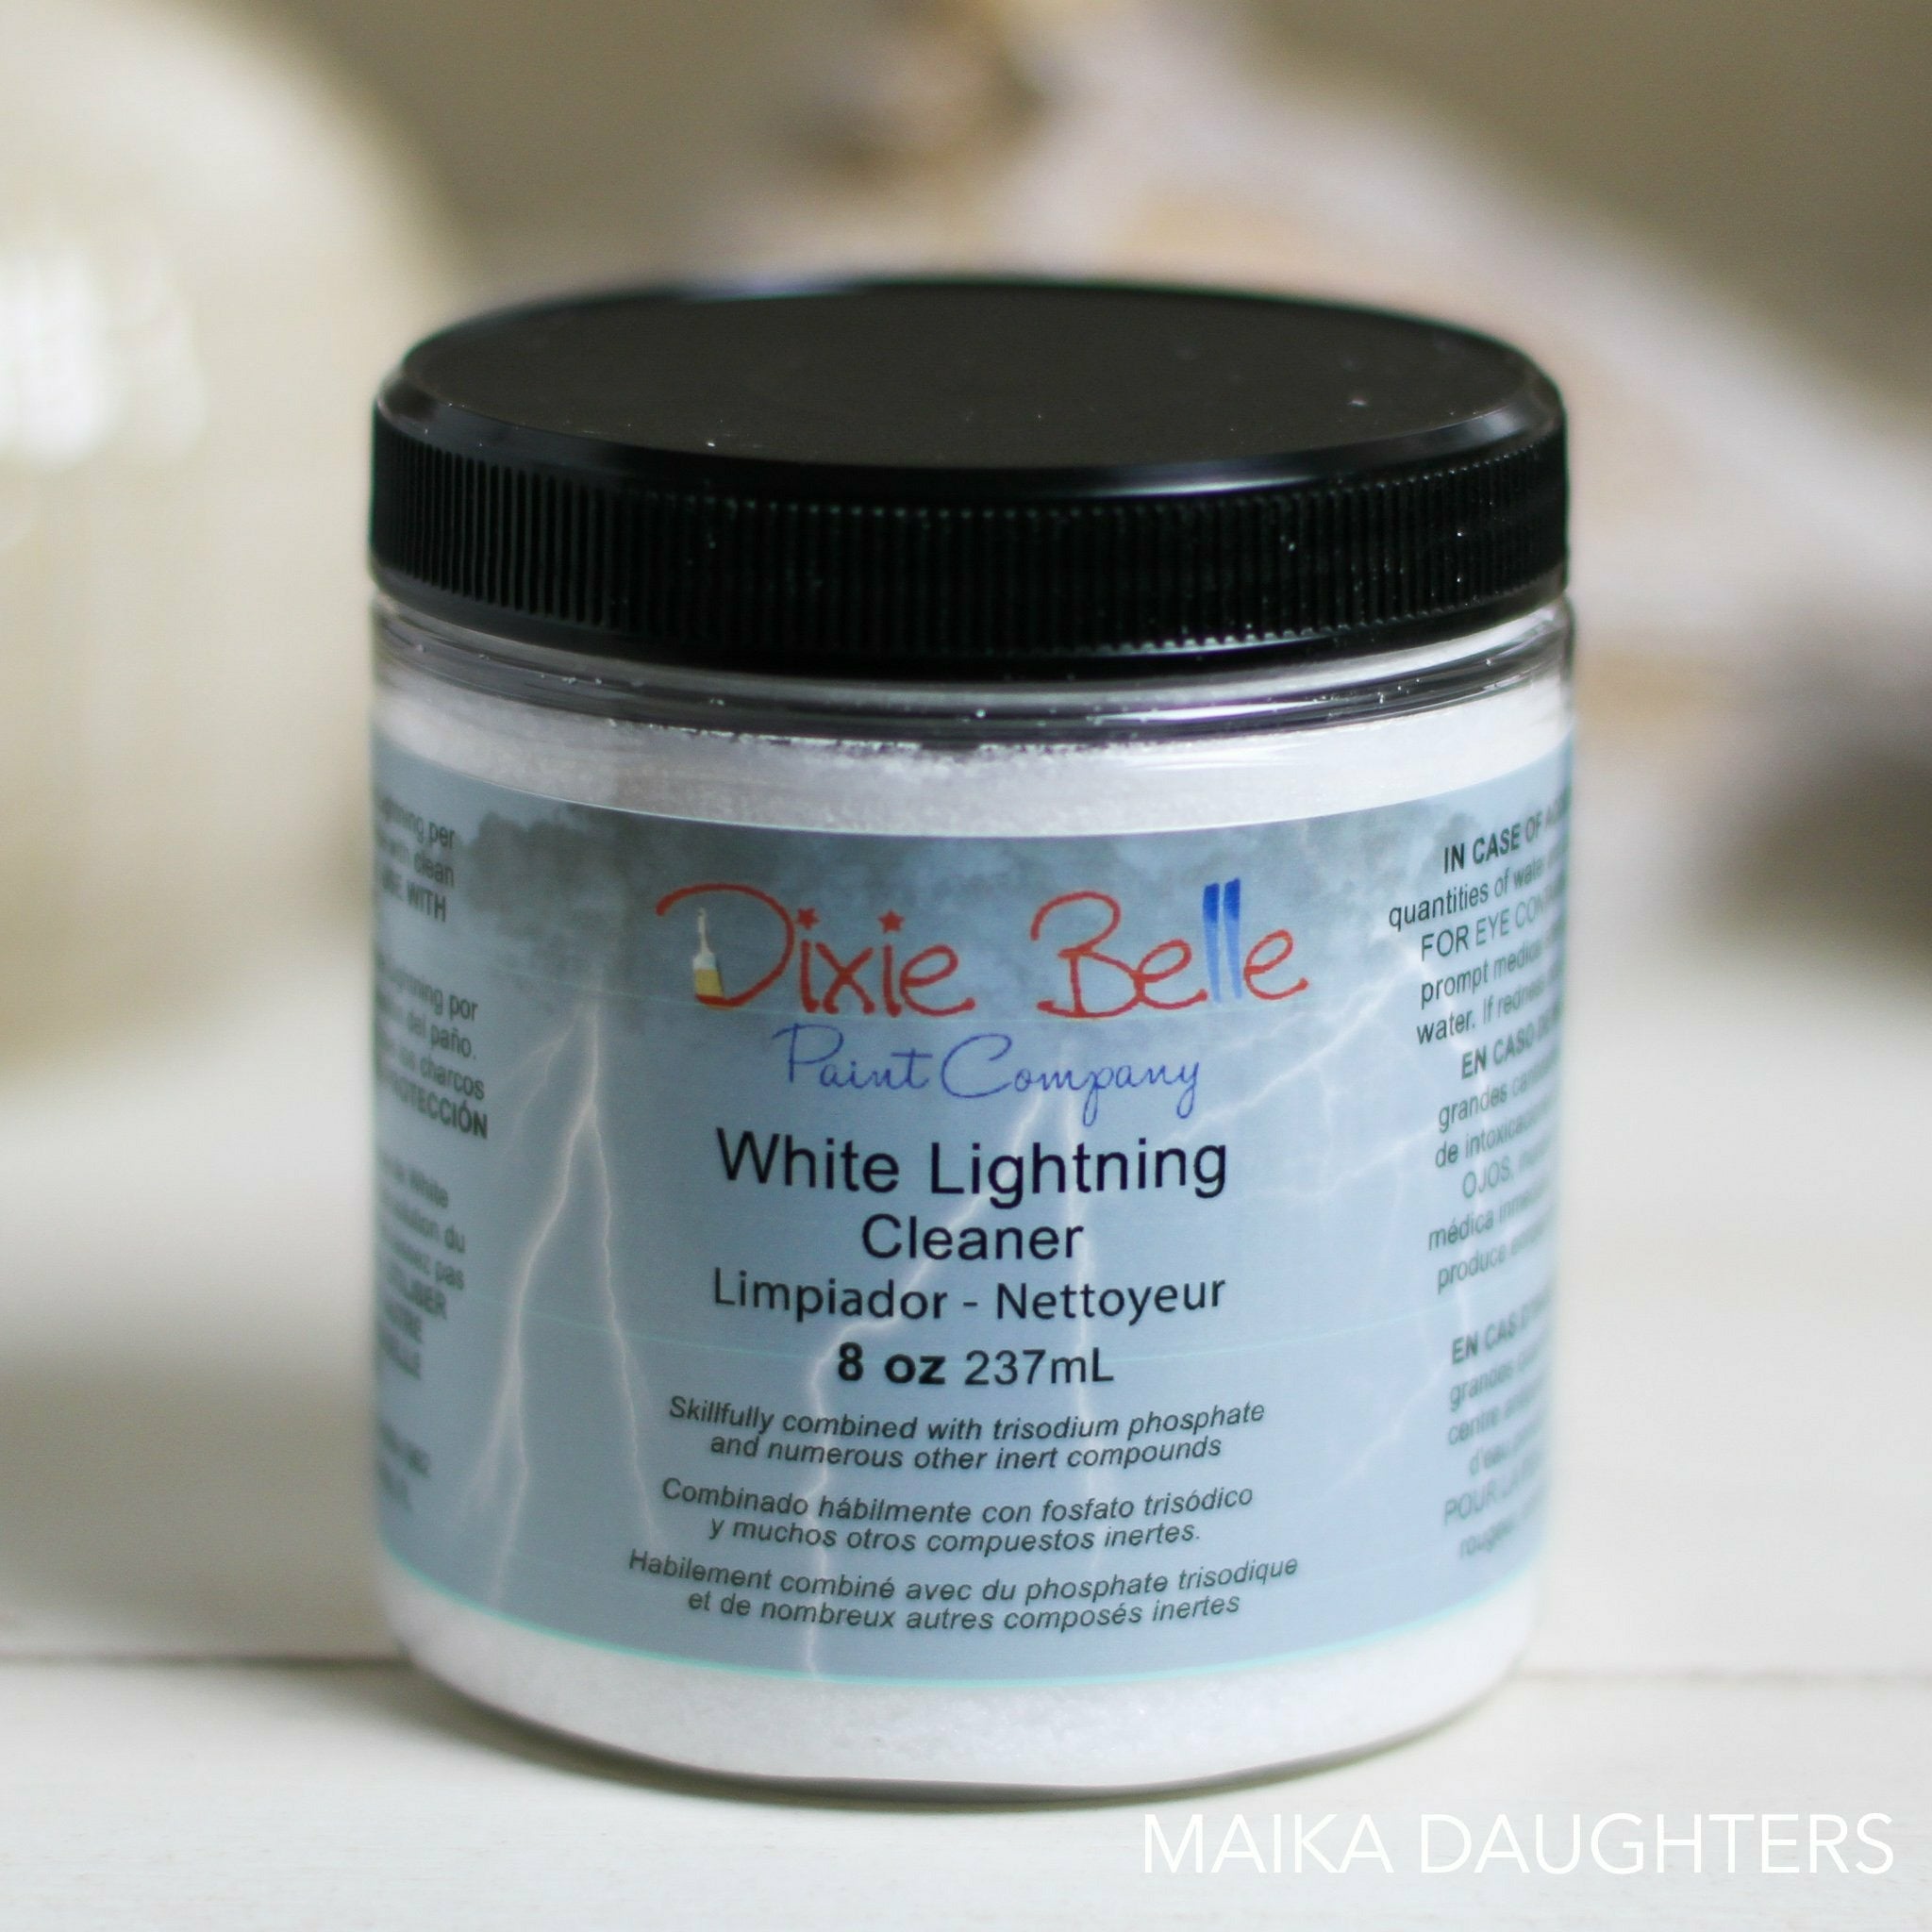 An 8oz container of Dixie Belle's White Lightning Cleaner is against a light beige background. This furniture cleaner will de-grease and remove all debris from your furniture, kitchen cabinets or whatever you want to paint.